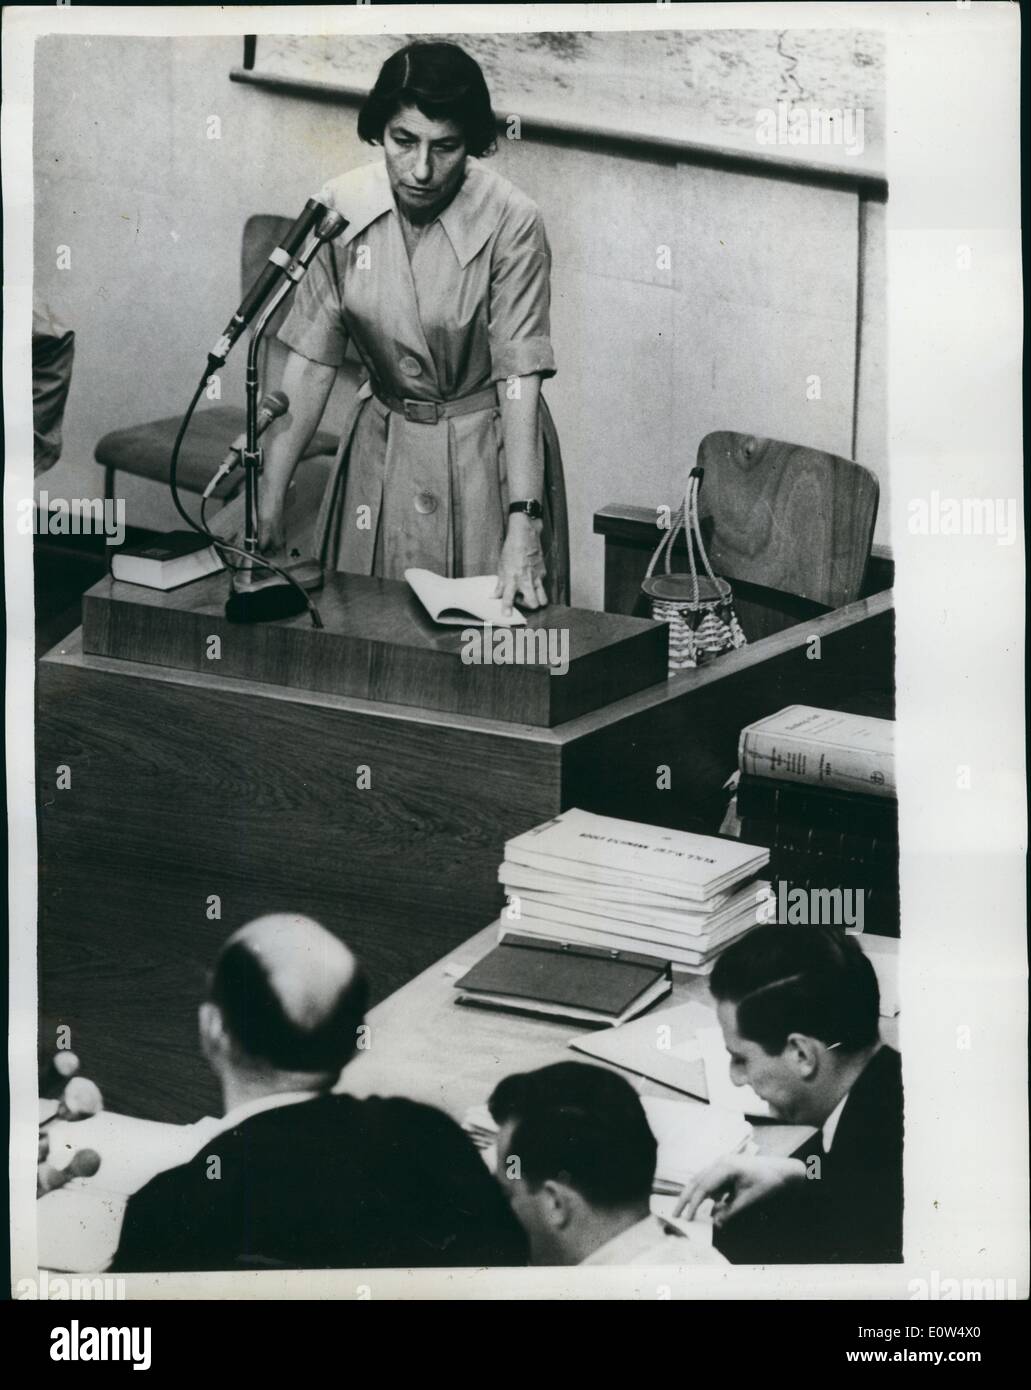 May 05, 1961 - Mrs. Lubetkin-Zuckerman gives evidence at trial of Adolf Eichmann: One of the witnesses who gave evidence at the Stock Photo